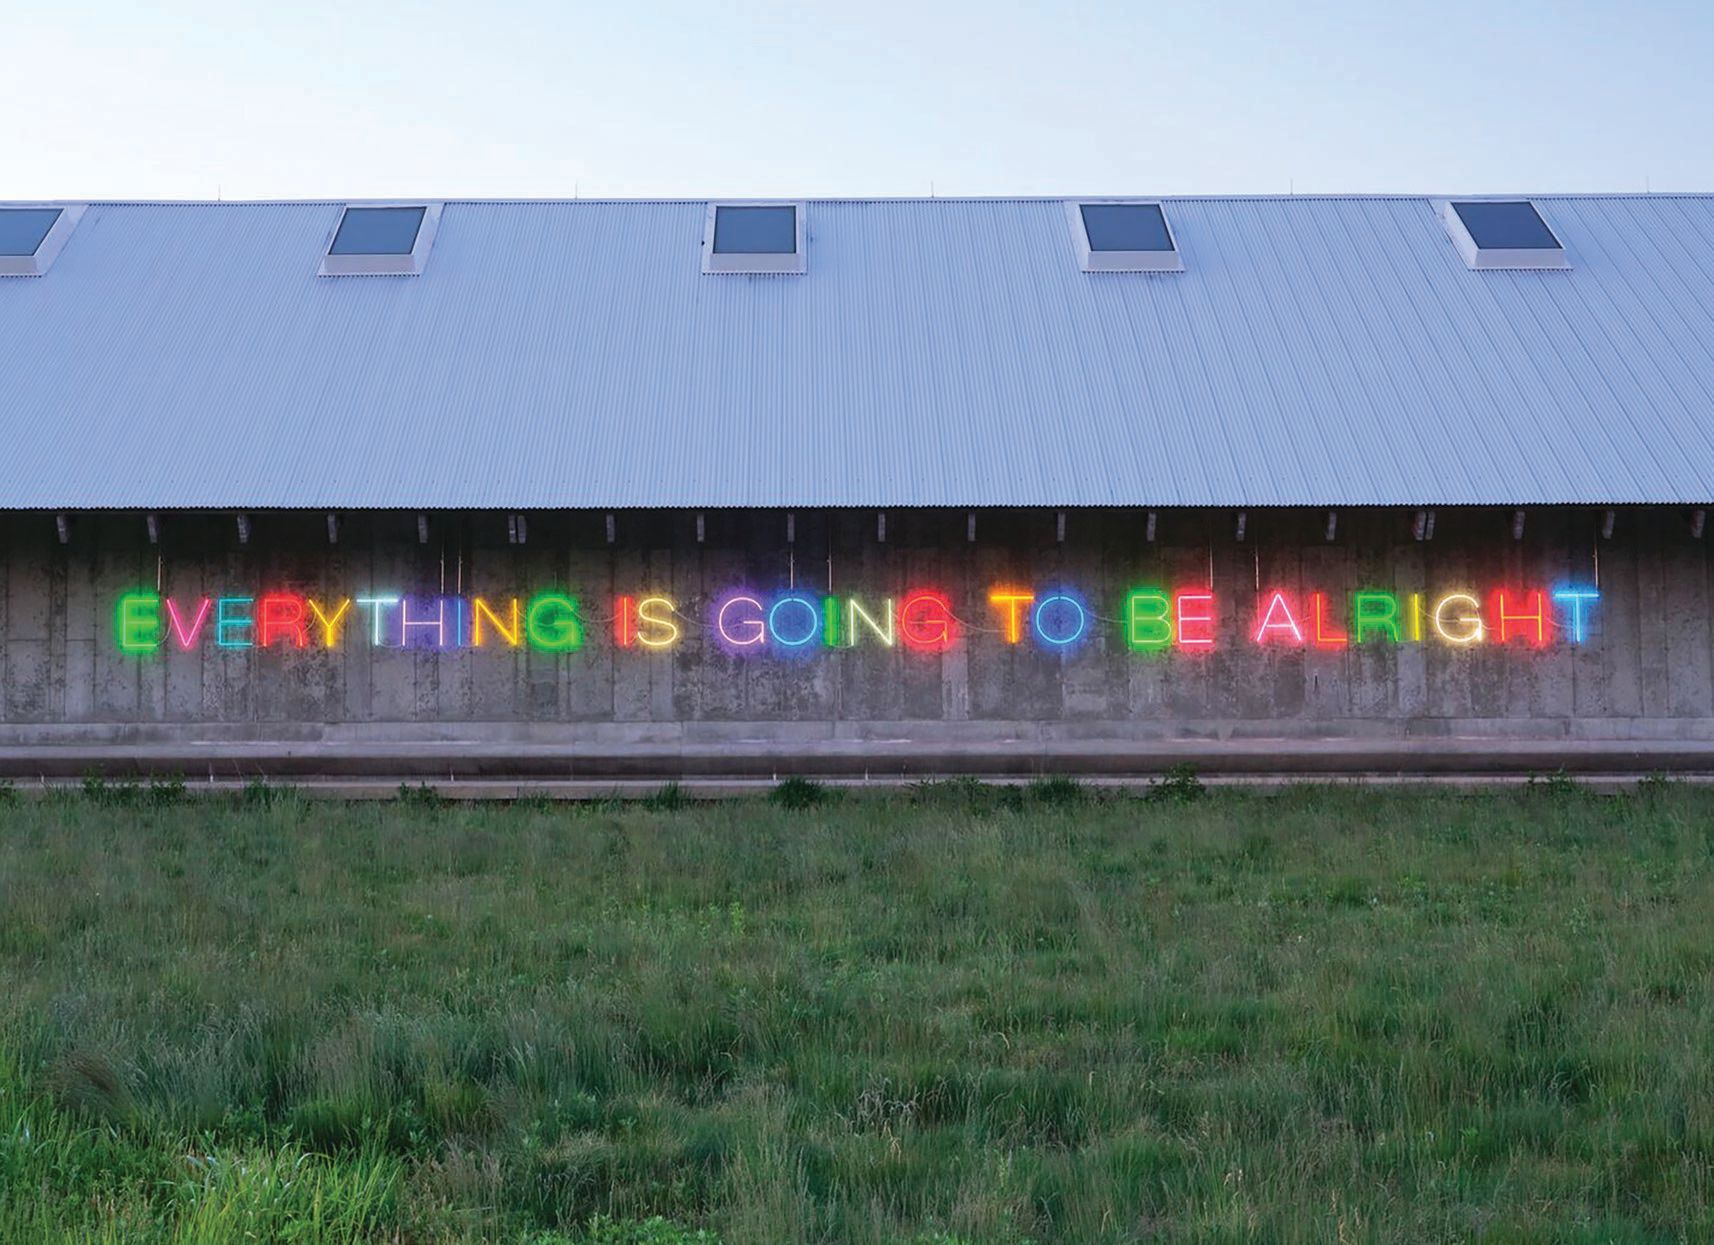 Installation view of Martin Creed, “Work No. 221, EVERYTHING IS GOING TO BE ALRIGHT” (2015) PHOTO: BY THOMAS BARRATT/COURTESY OF THE ARTIST AND HAUSER & WIRTH